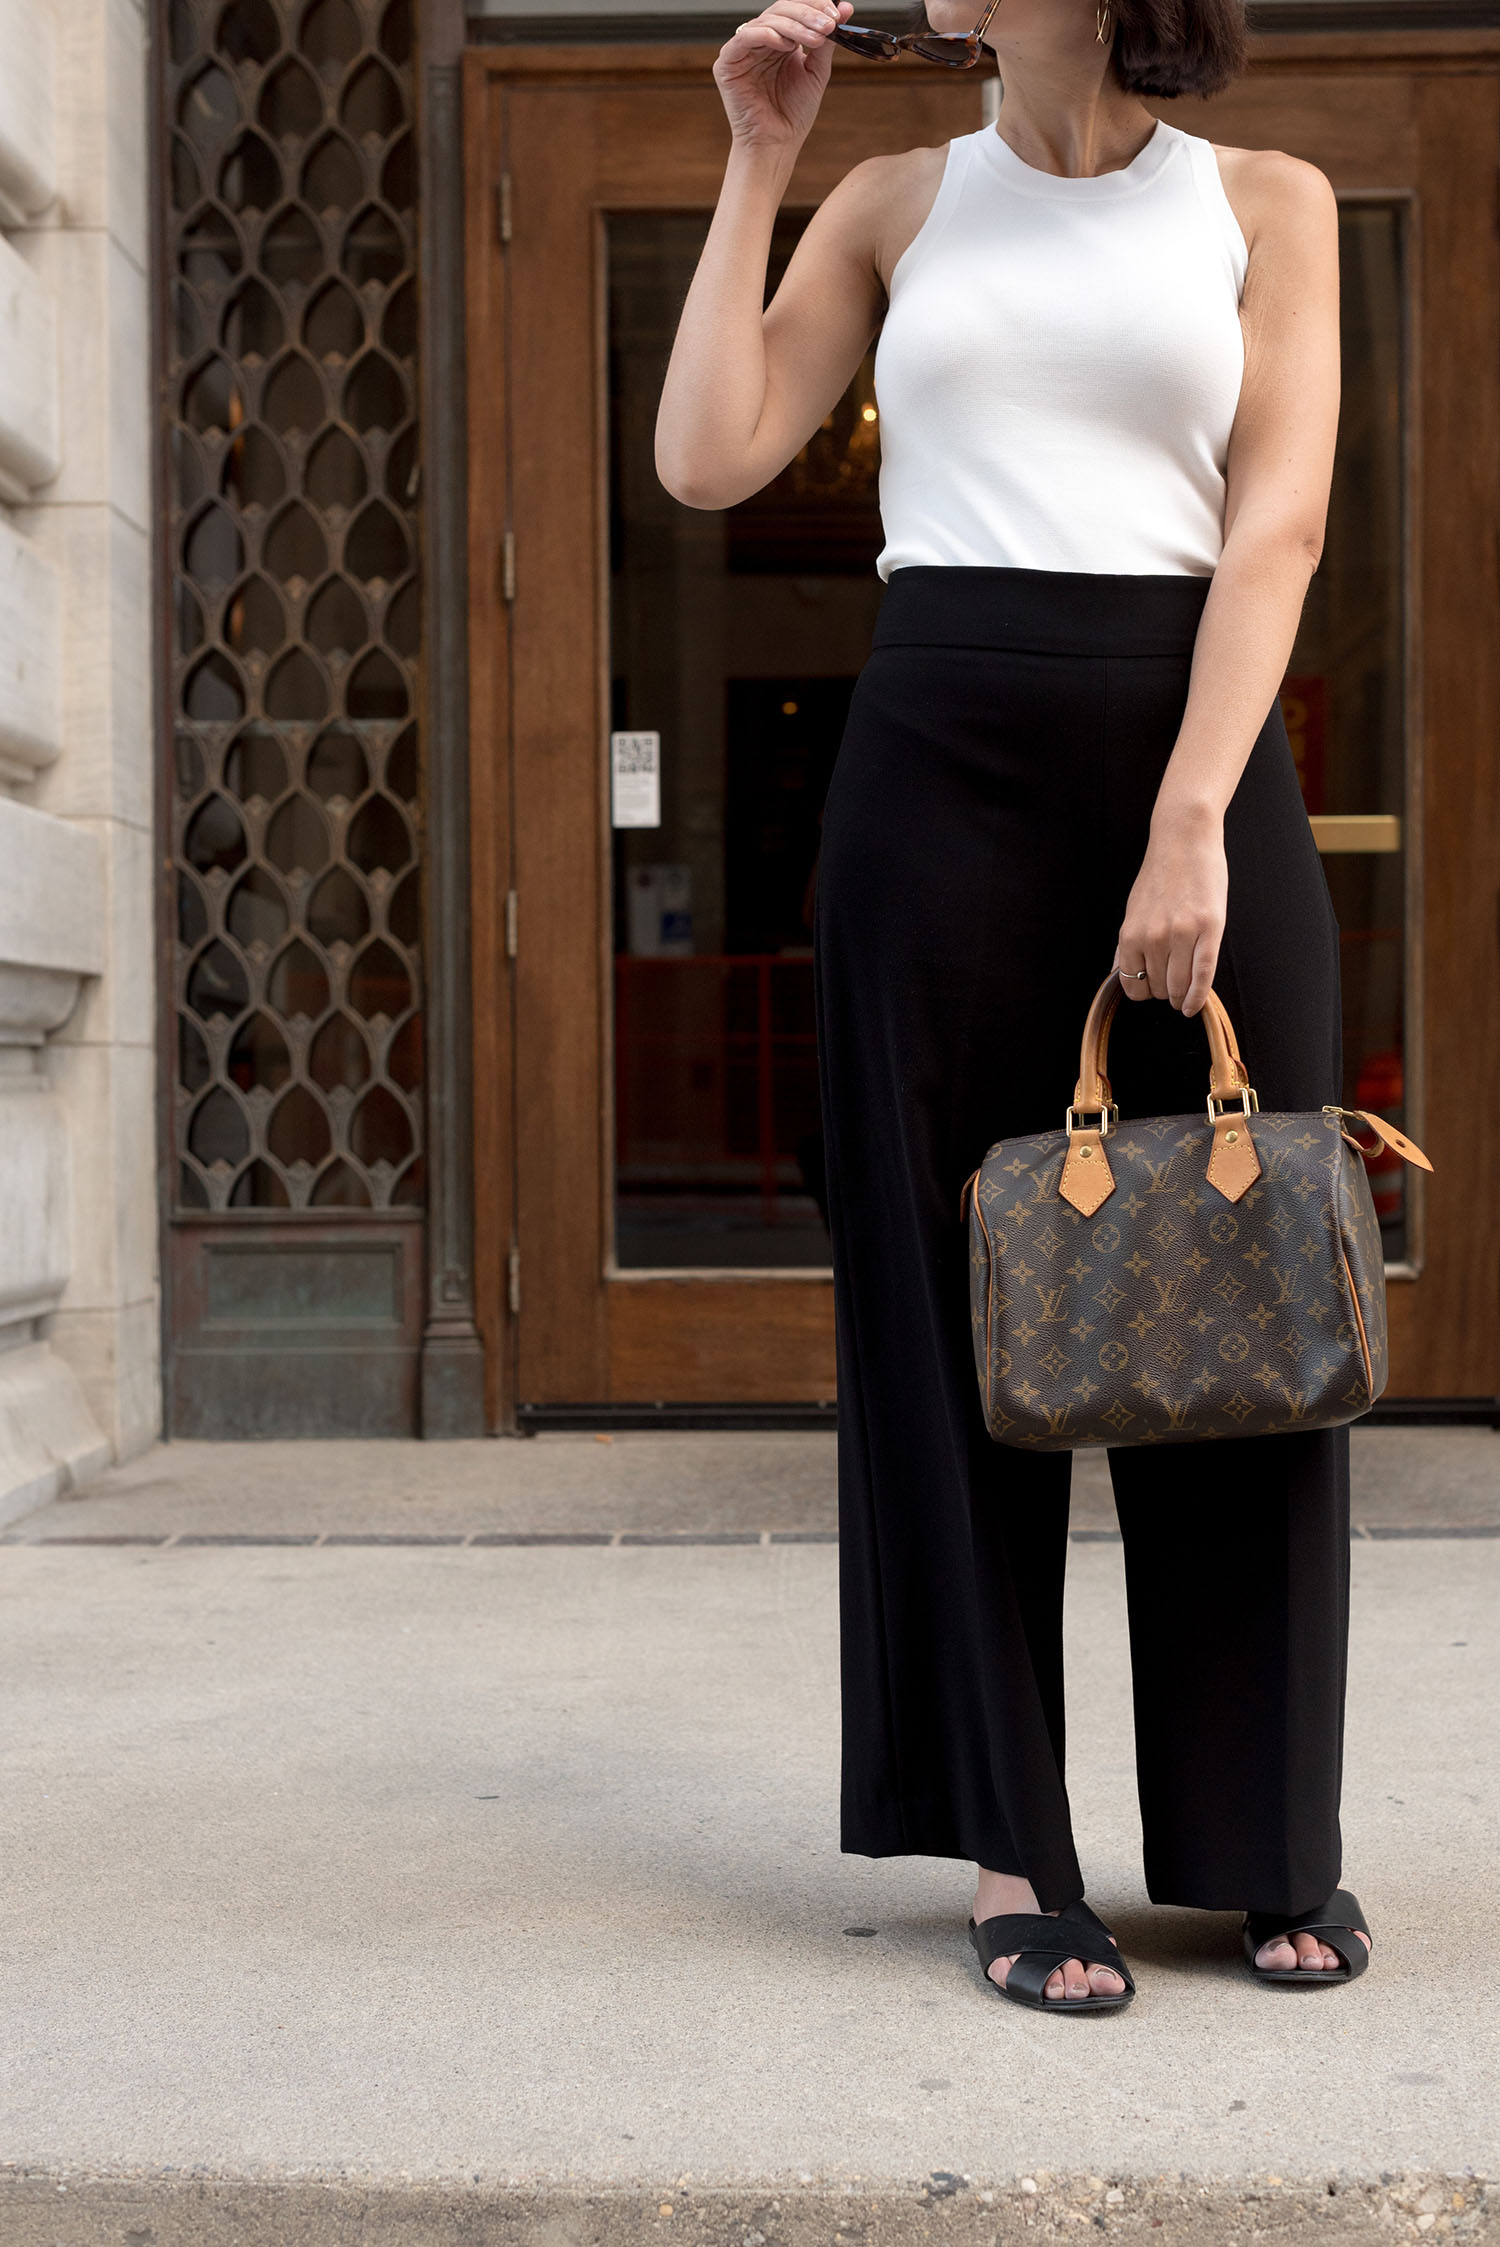 Outfit details on top Canadian fashion blogger Cee Fardoe of Coco & Vera, including Aldo leather slides and Zara trousers, while she talks about living backwards